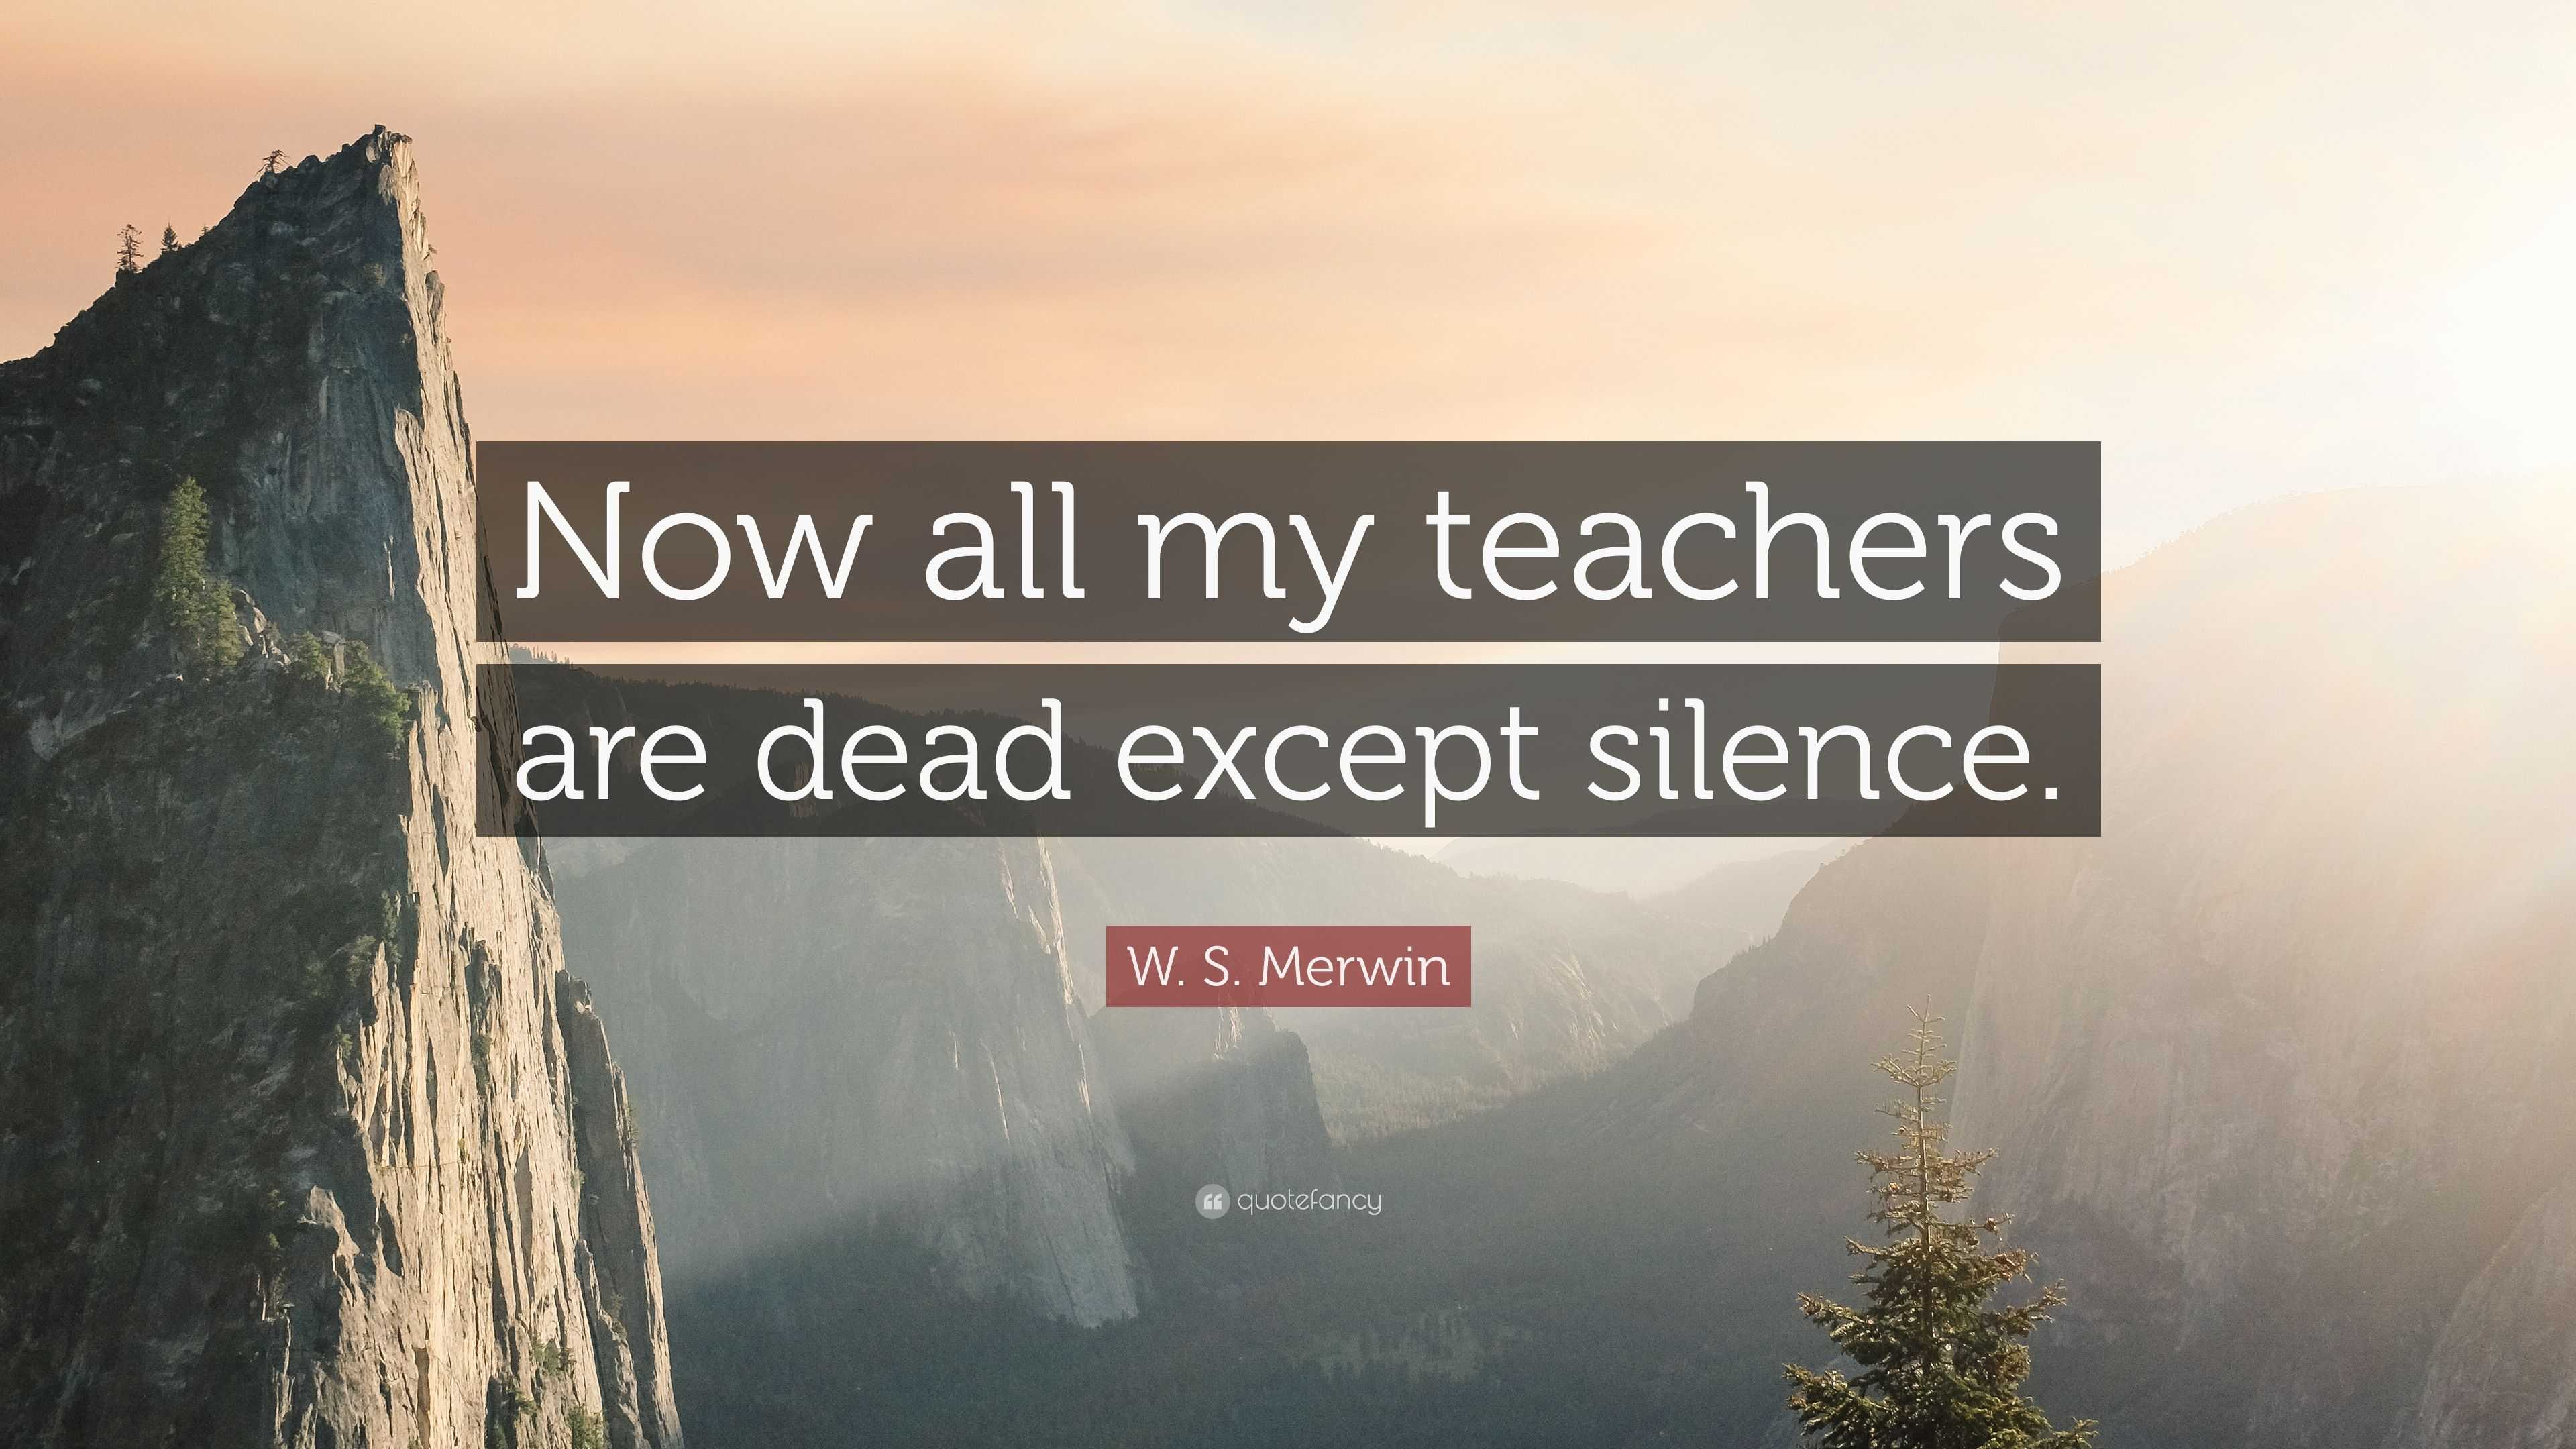 W. S. Merwin Quote: “Now all my teachers are dead except silence.”